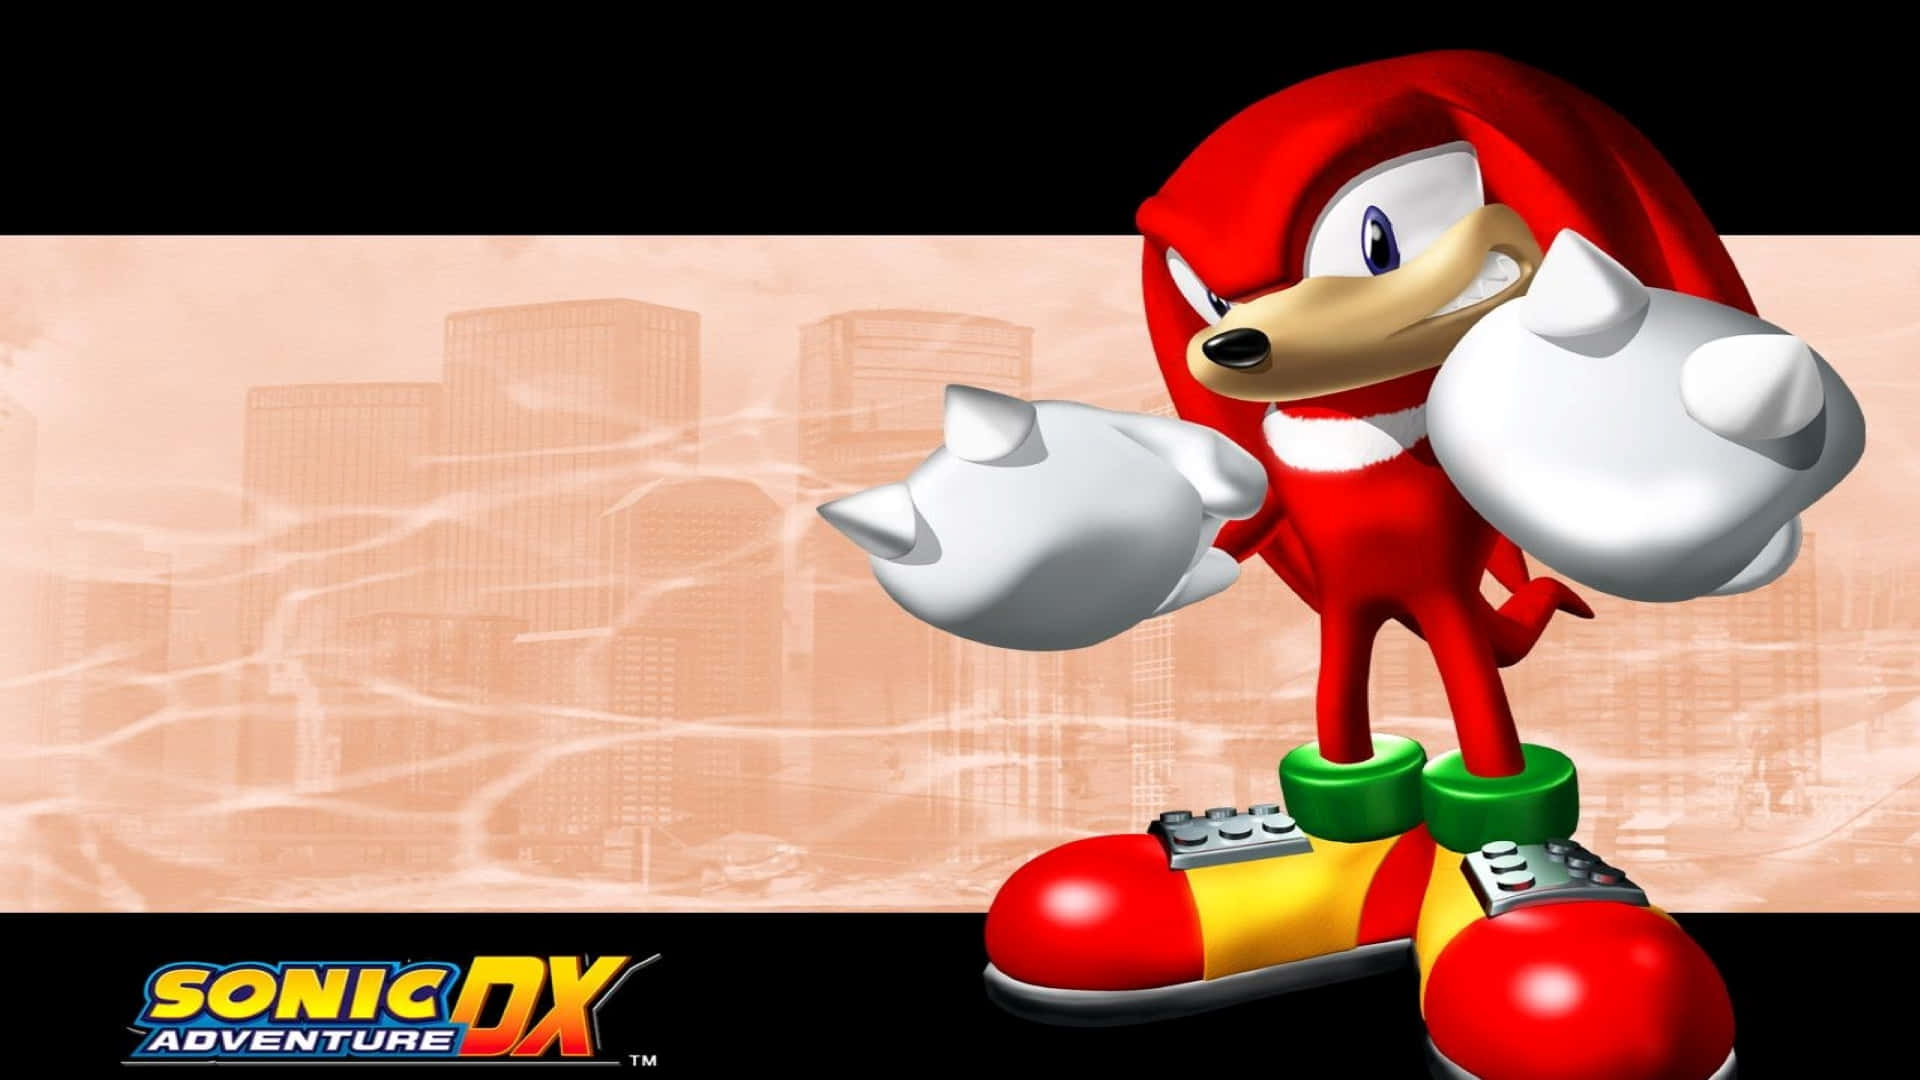 Explosive Action with Sonic Adventure HD Wallpaper